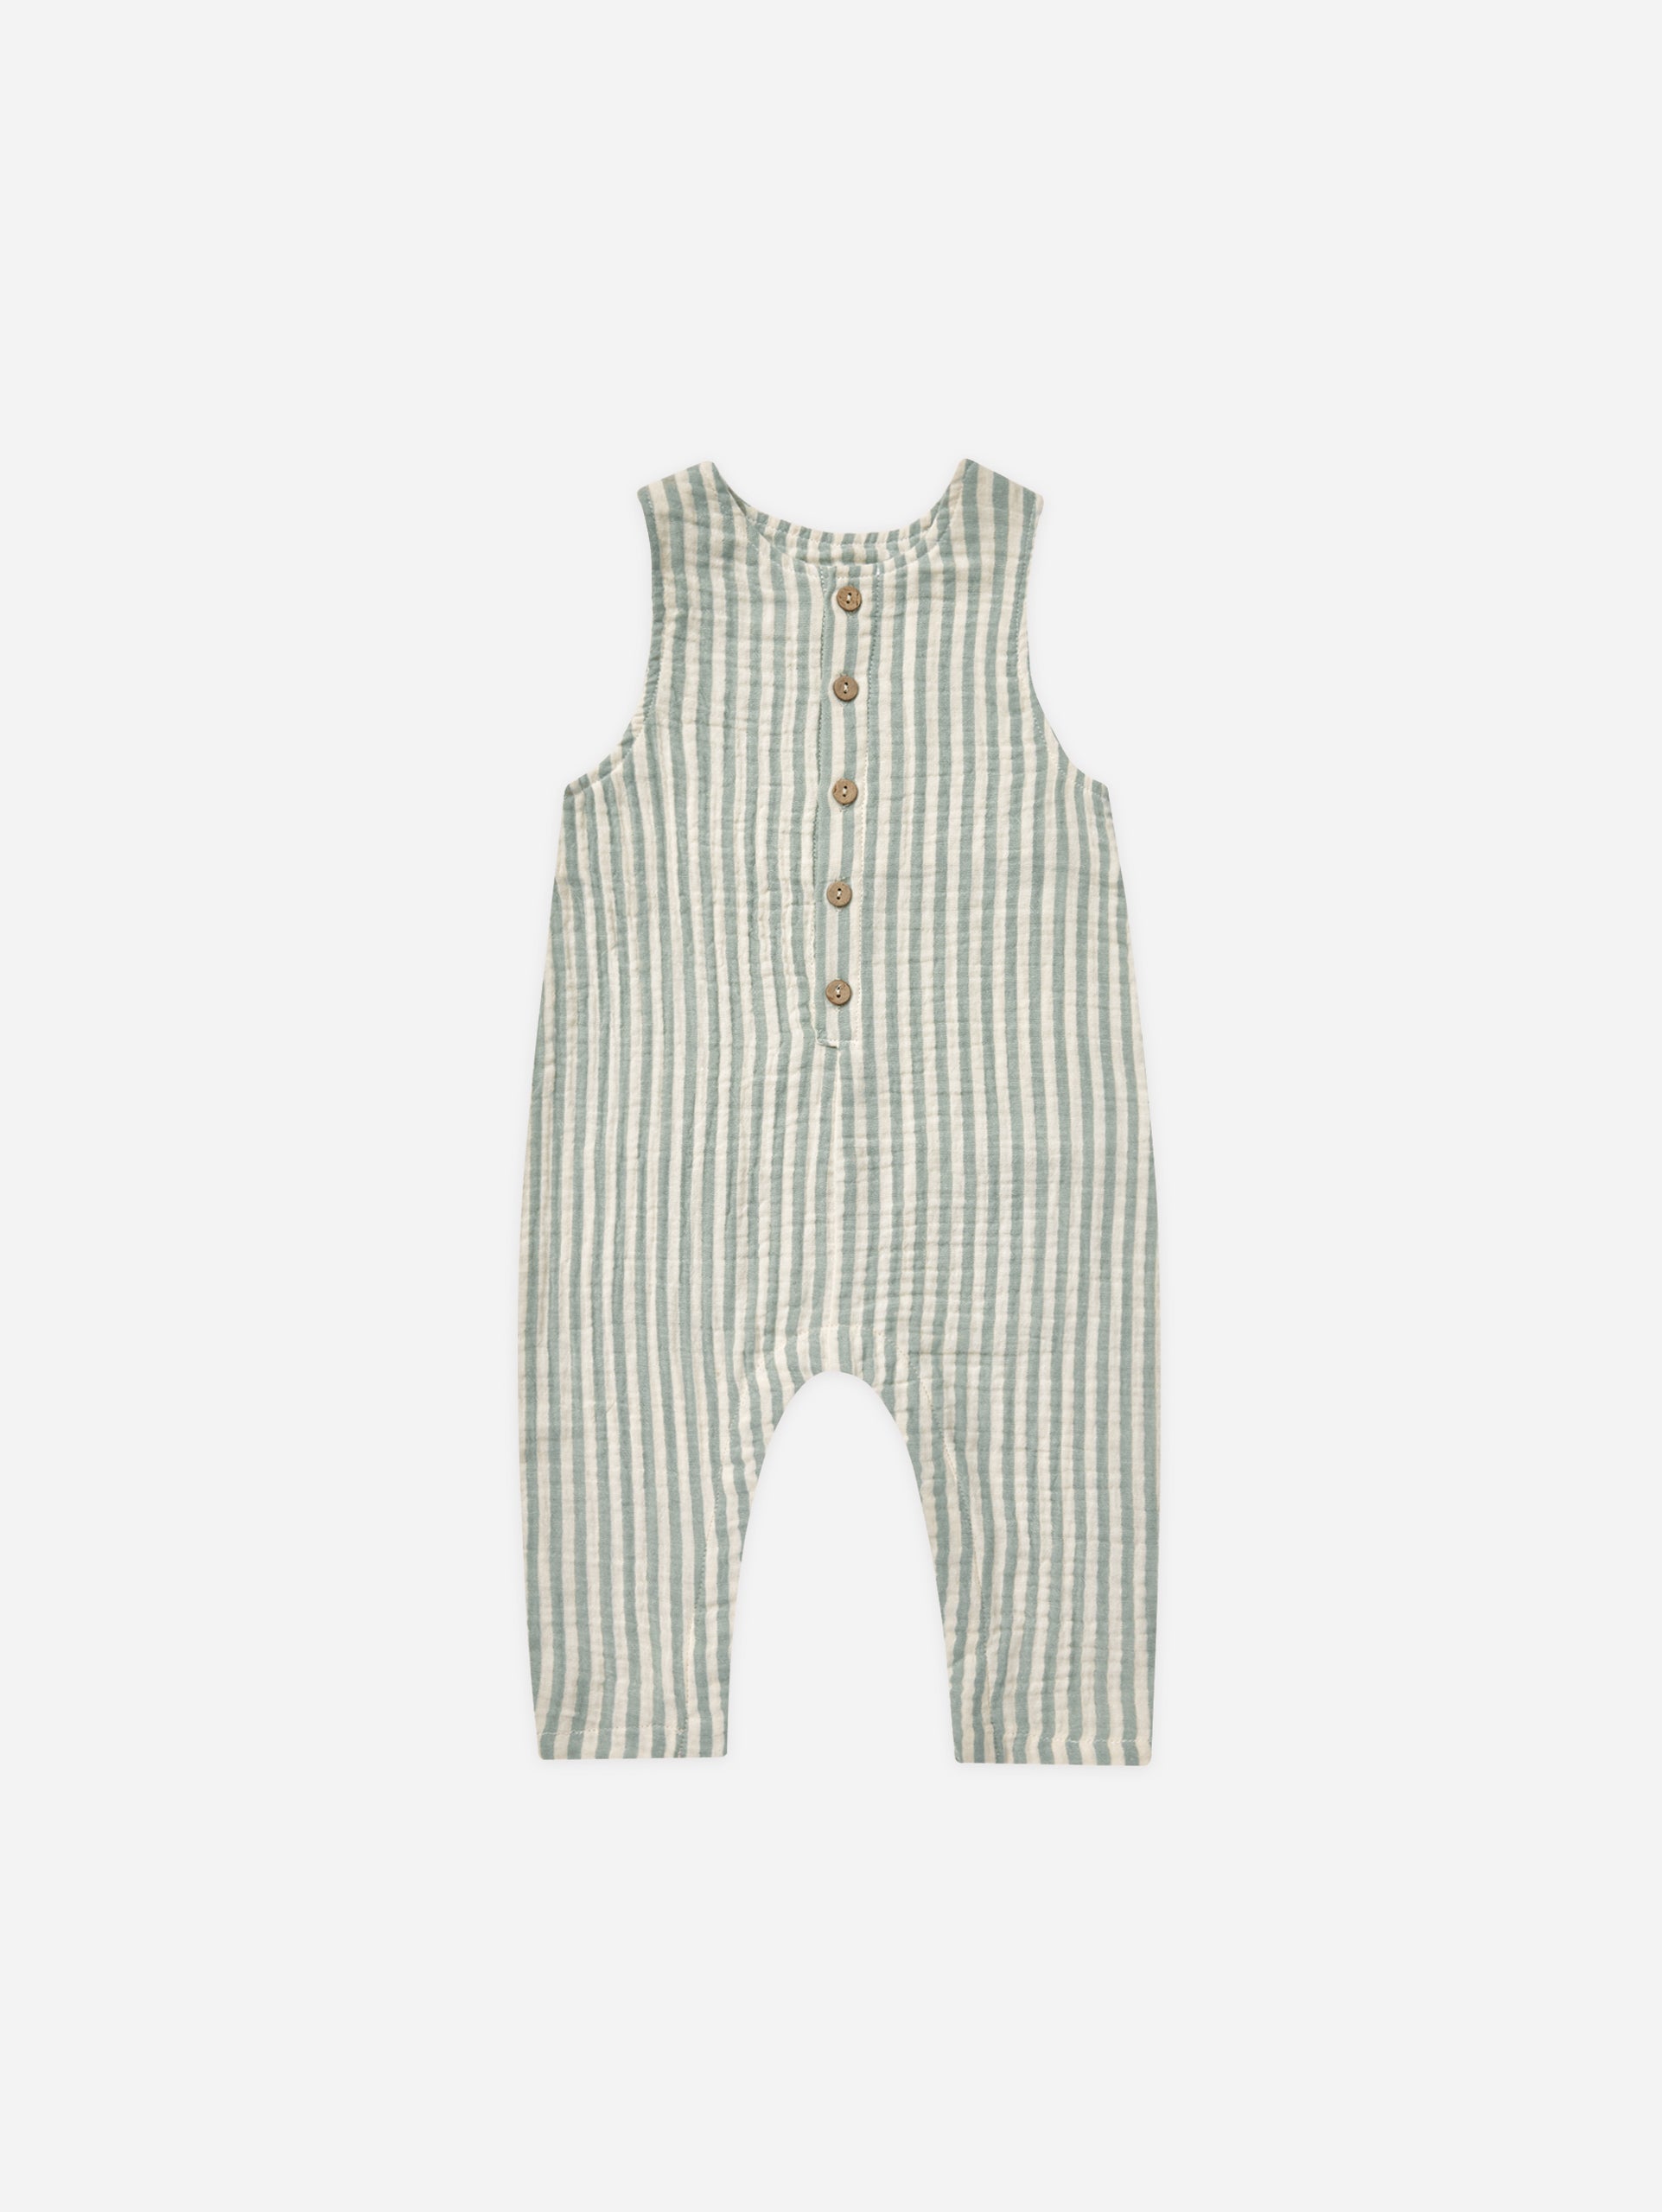 Button Jumpsuit || Summer Stripe - Rylee + Cru | Kids Clothes | Trendy Baby Clothes | Modern Infant Outfits |